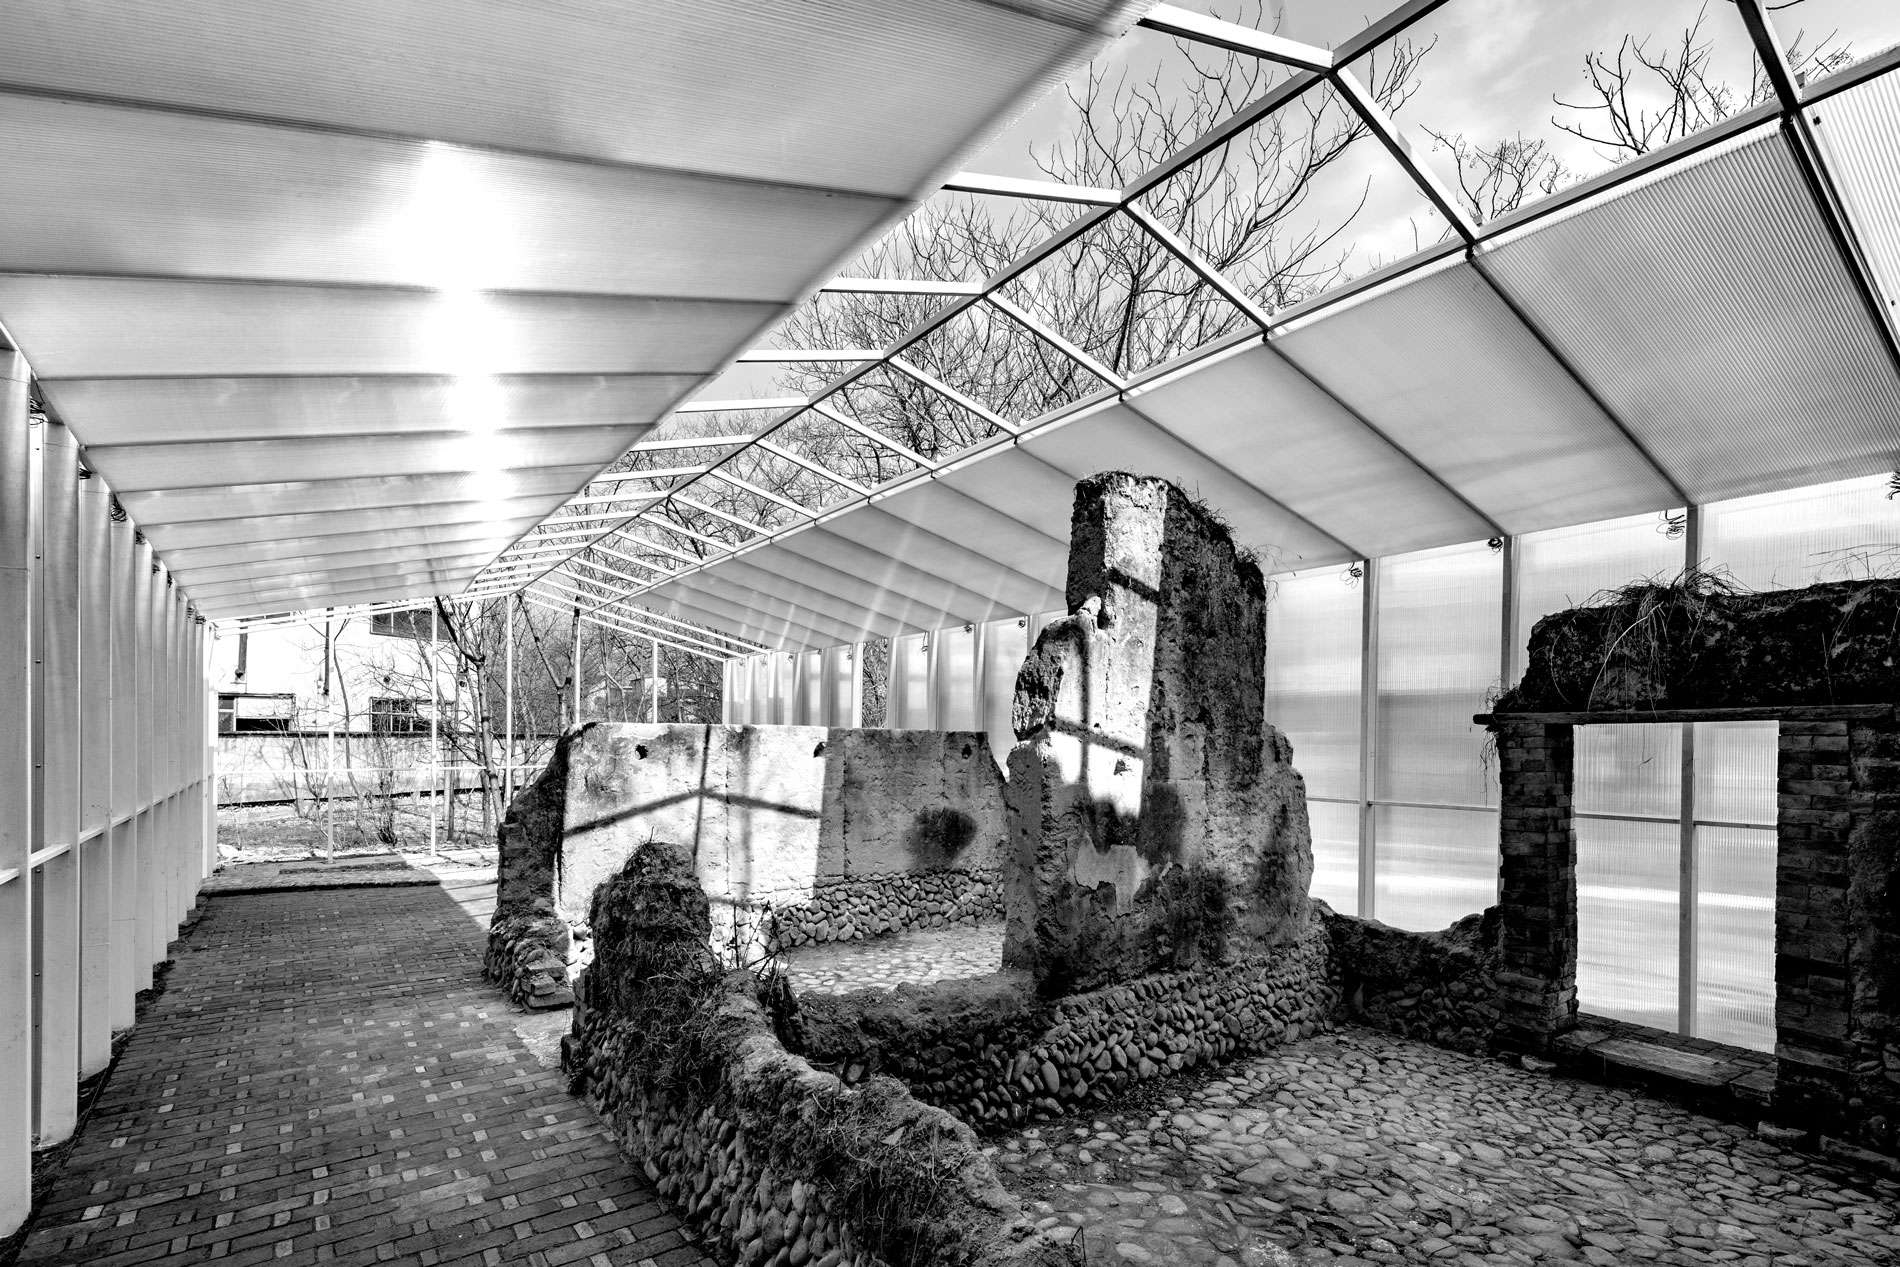 Black and white, daytime image of the interior of a greenhouse with plants growing from a scaffold